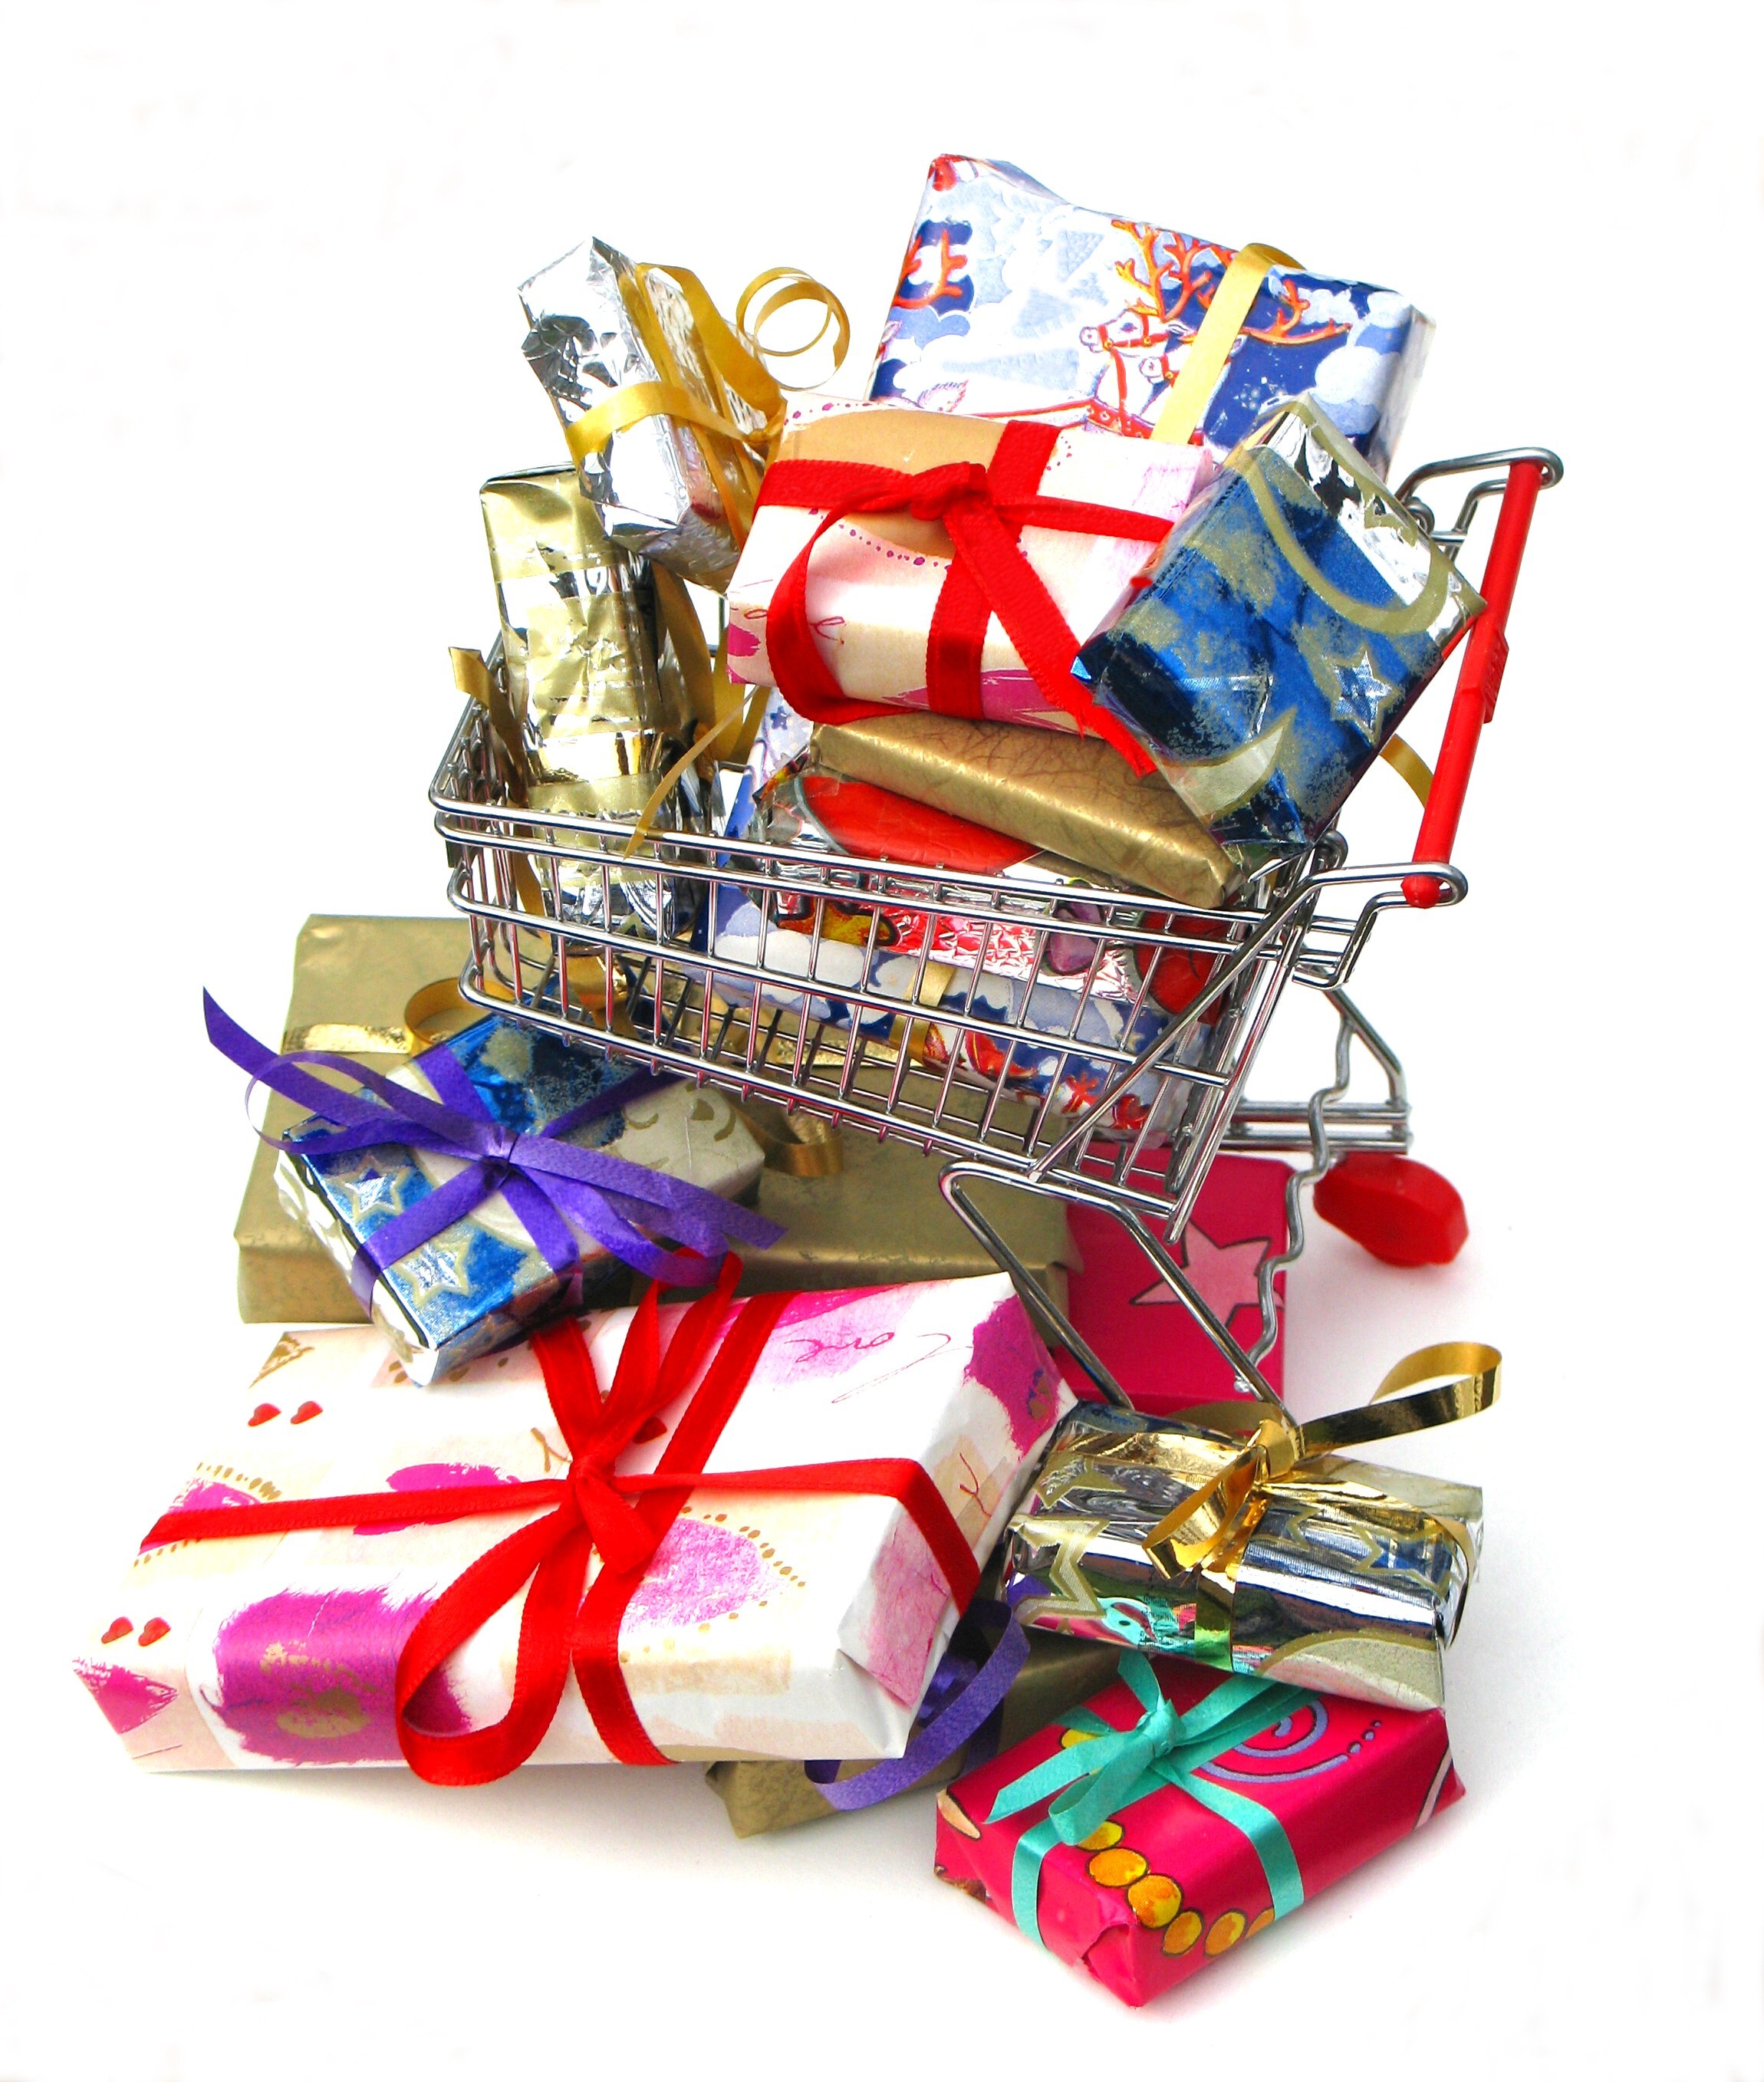 1 shopping for present. Gift items. Shopping presents. A lot of Gifts. Gift items Dubai Suppliers Gift items in Abu Dhabi.